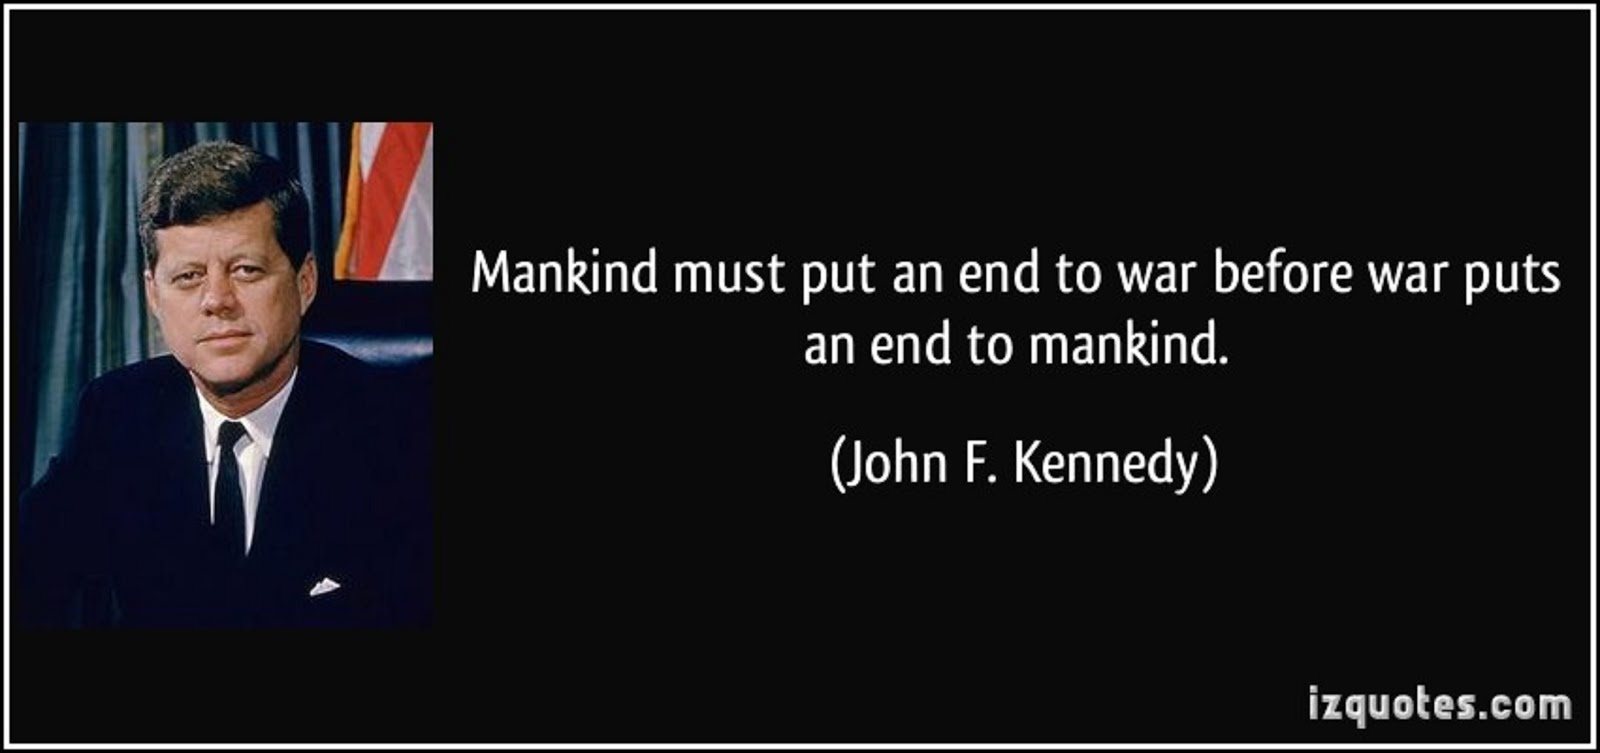 MANKIND MUST PUT AN END TO WAR BEFORE WAR PUTS AN END TO MANKIND